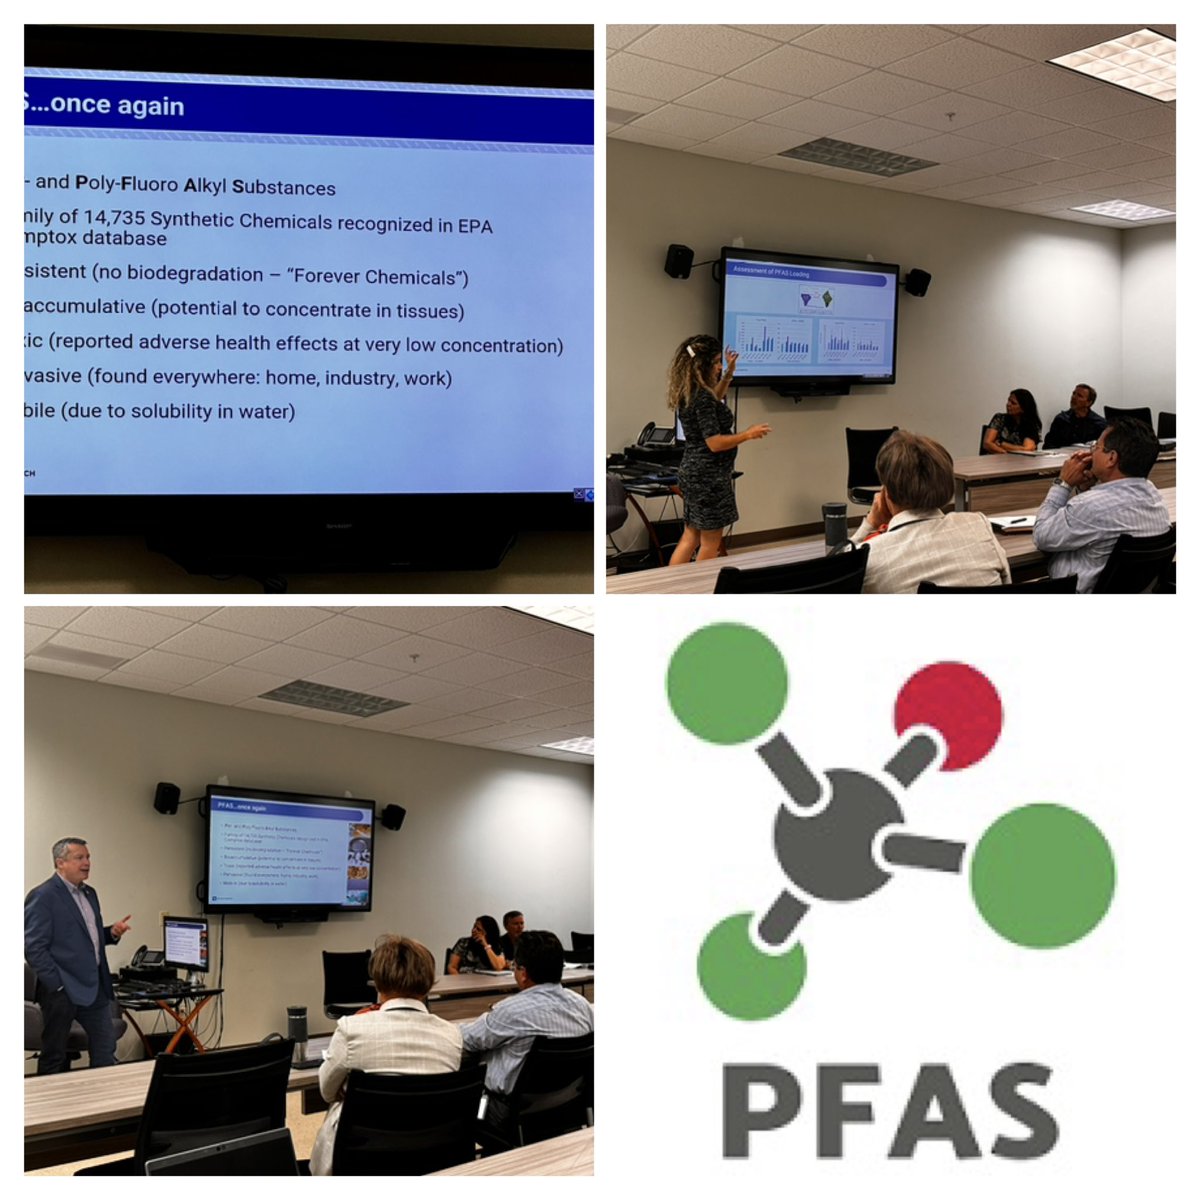 🙌 Excited to see @Black_Veatch PhDs leading the charge in addressing #PFAS regulations and ensuring safe water for all! @ Southeast Florida Utility Council. Good research & innovative solutions are crucial in safeguarding our environment and public health! #WaterResilience💧